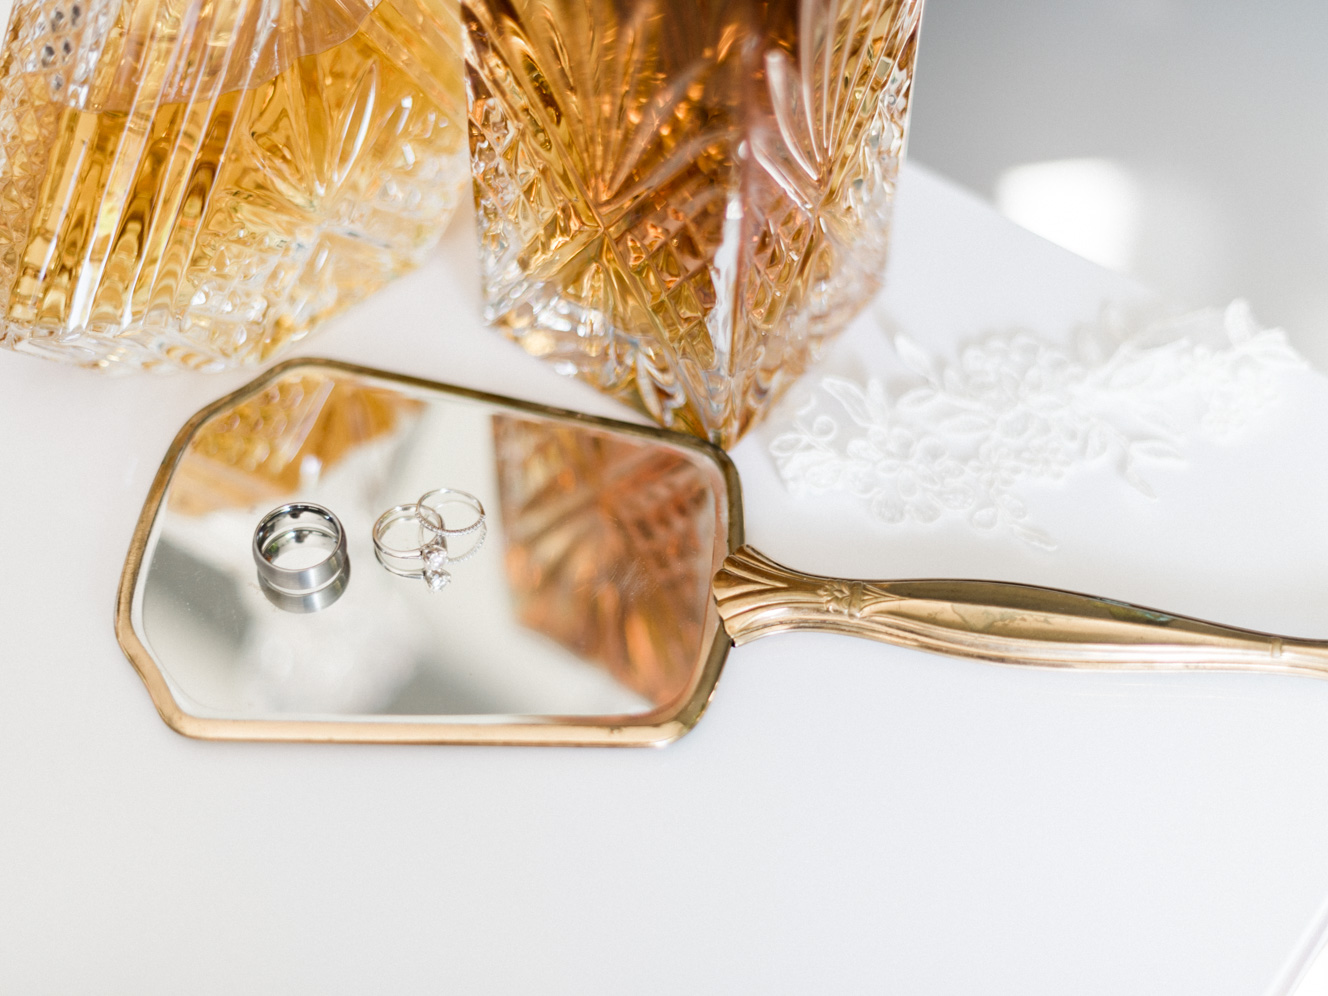 Wedding Ring Details With Lace Garter and Hand Held Vintage Mirror | kelseyandnate.com